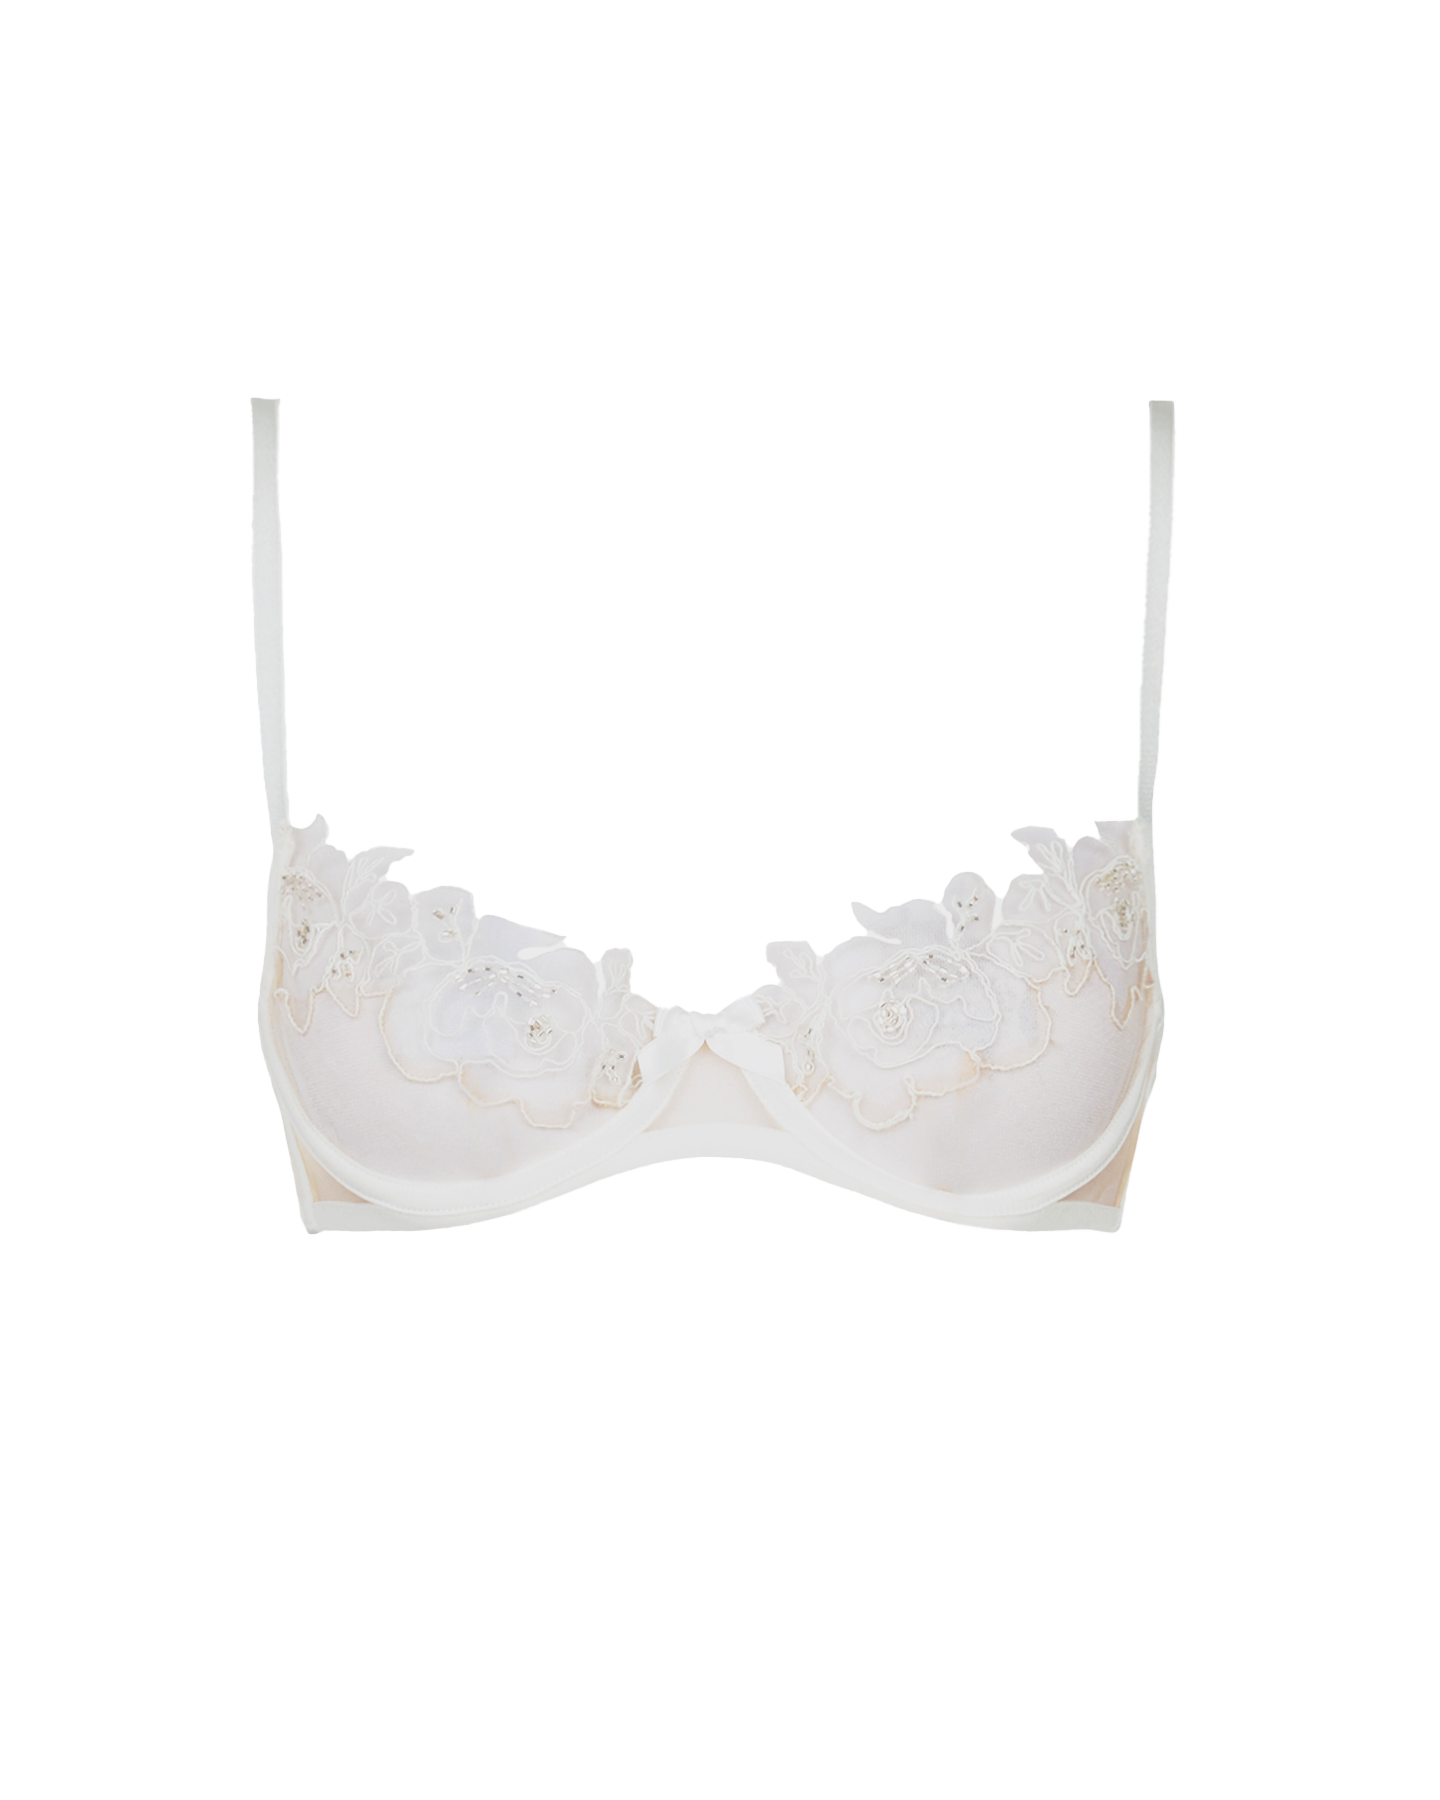 AGENT PROVOCATEUR Nude/Ivory Lindie Bra Size UK 36D BNWT (RARE